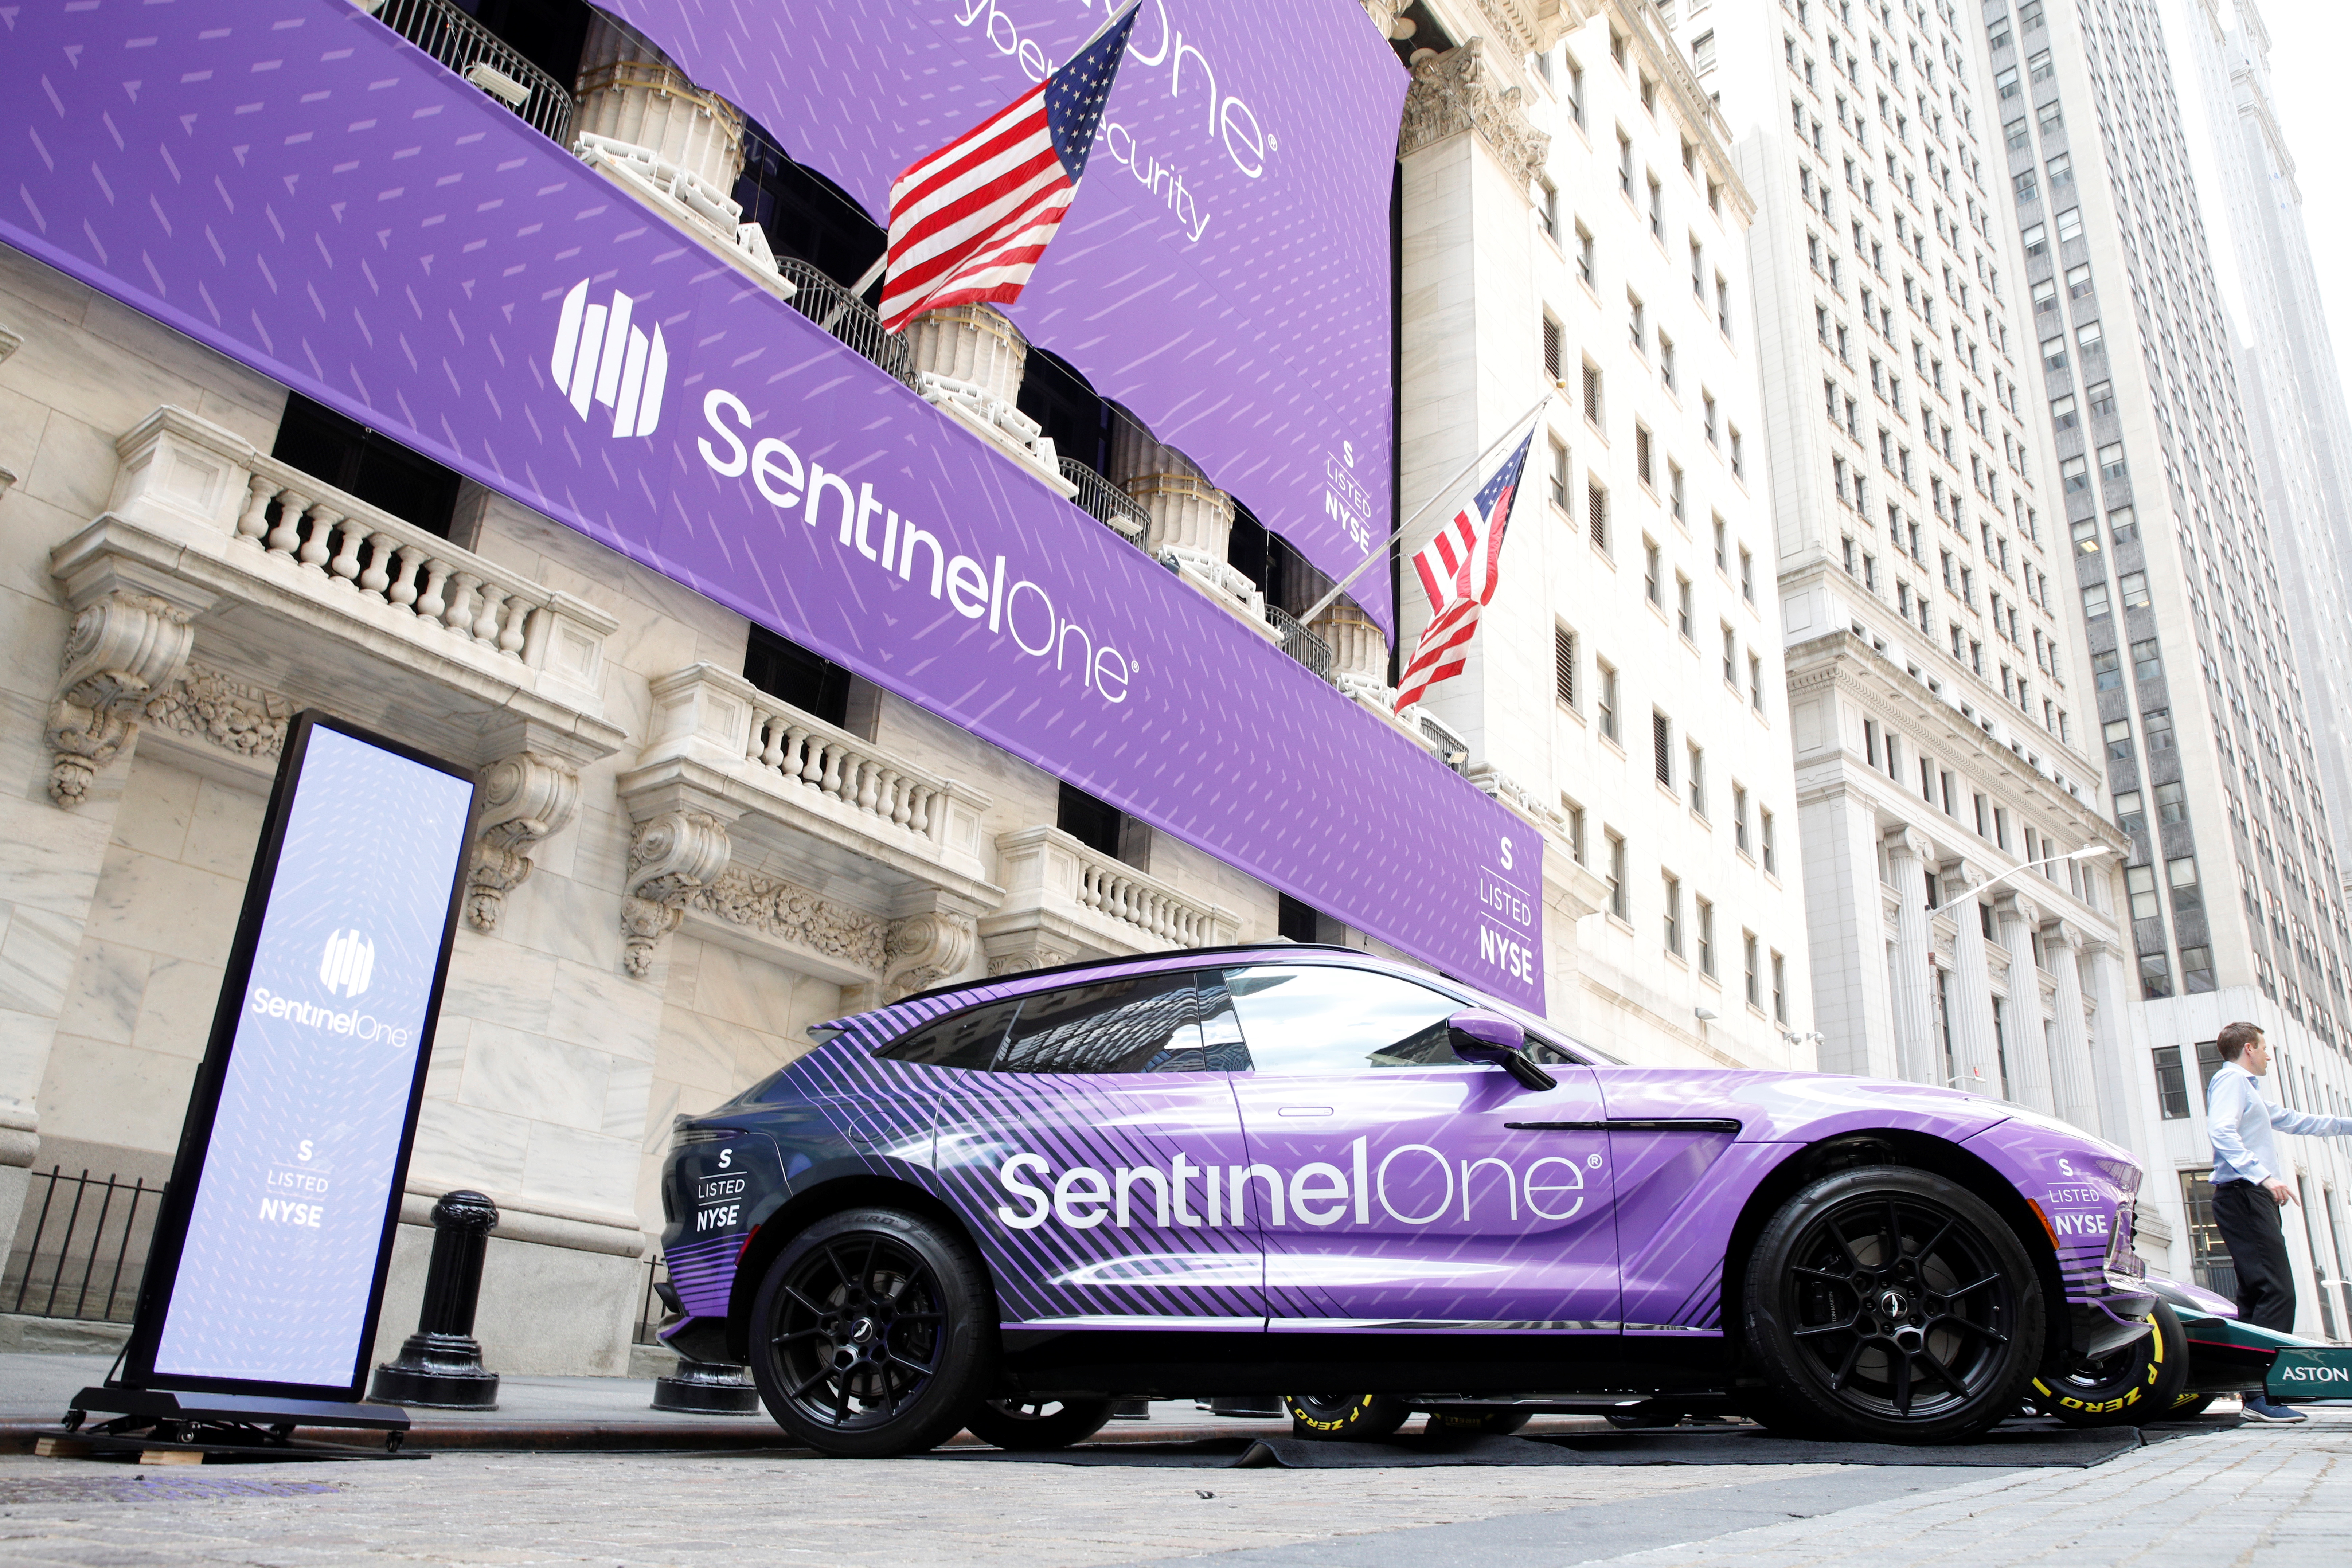 Signage and cars are displayed in honor of SentinelOne, a cybersecurity firm’s IPO, outside the NYSE in New York